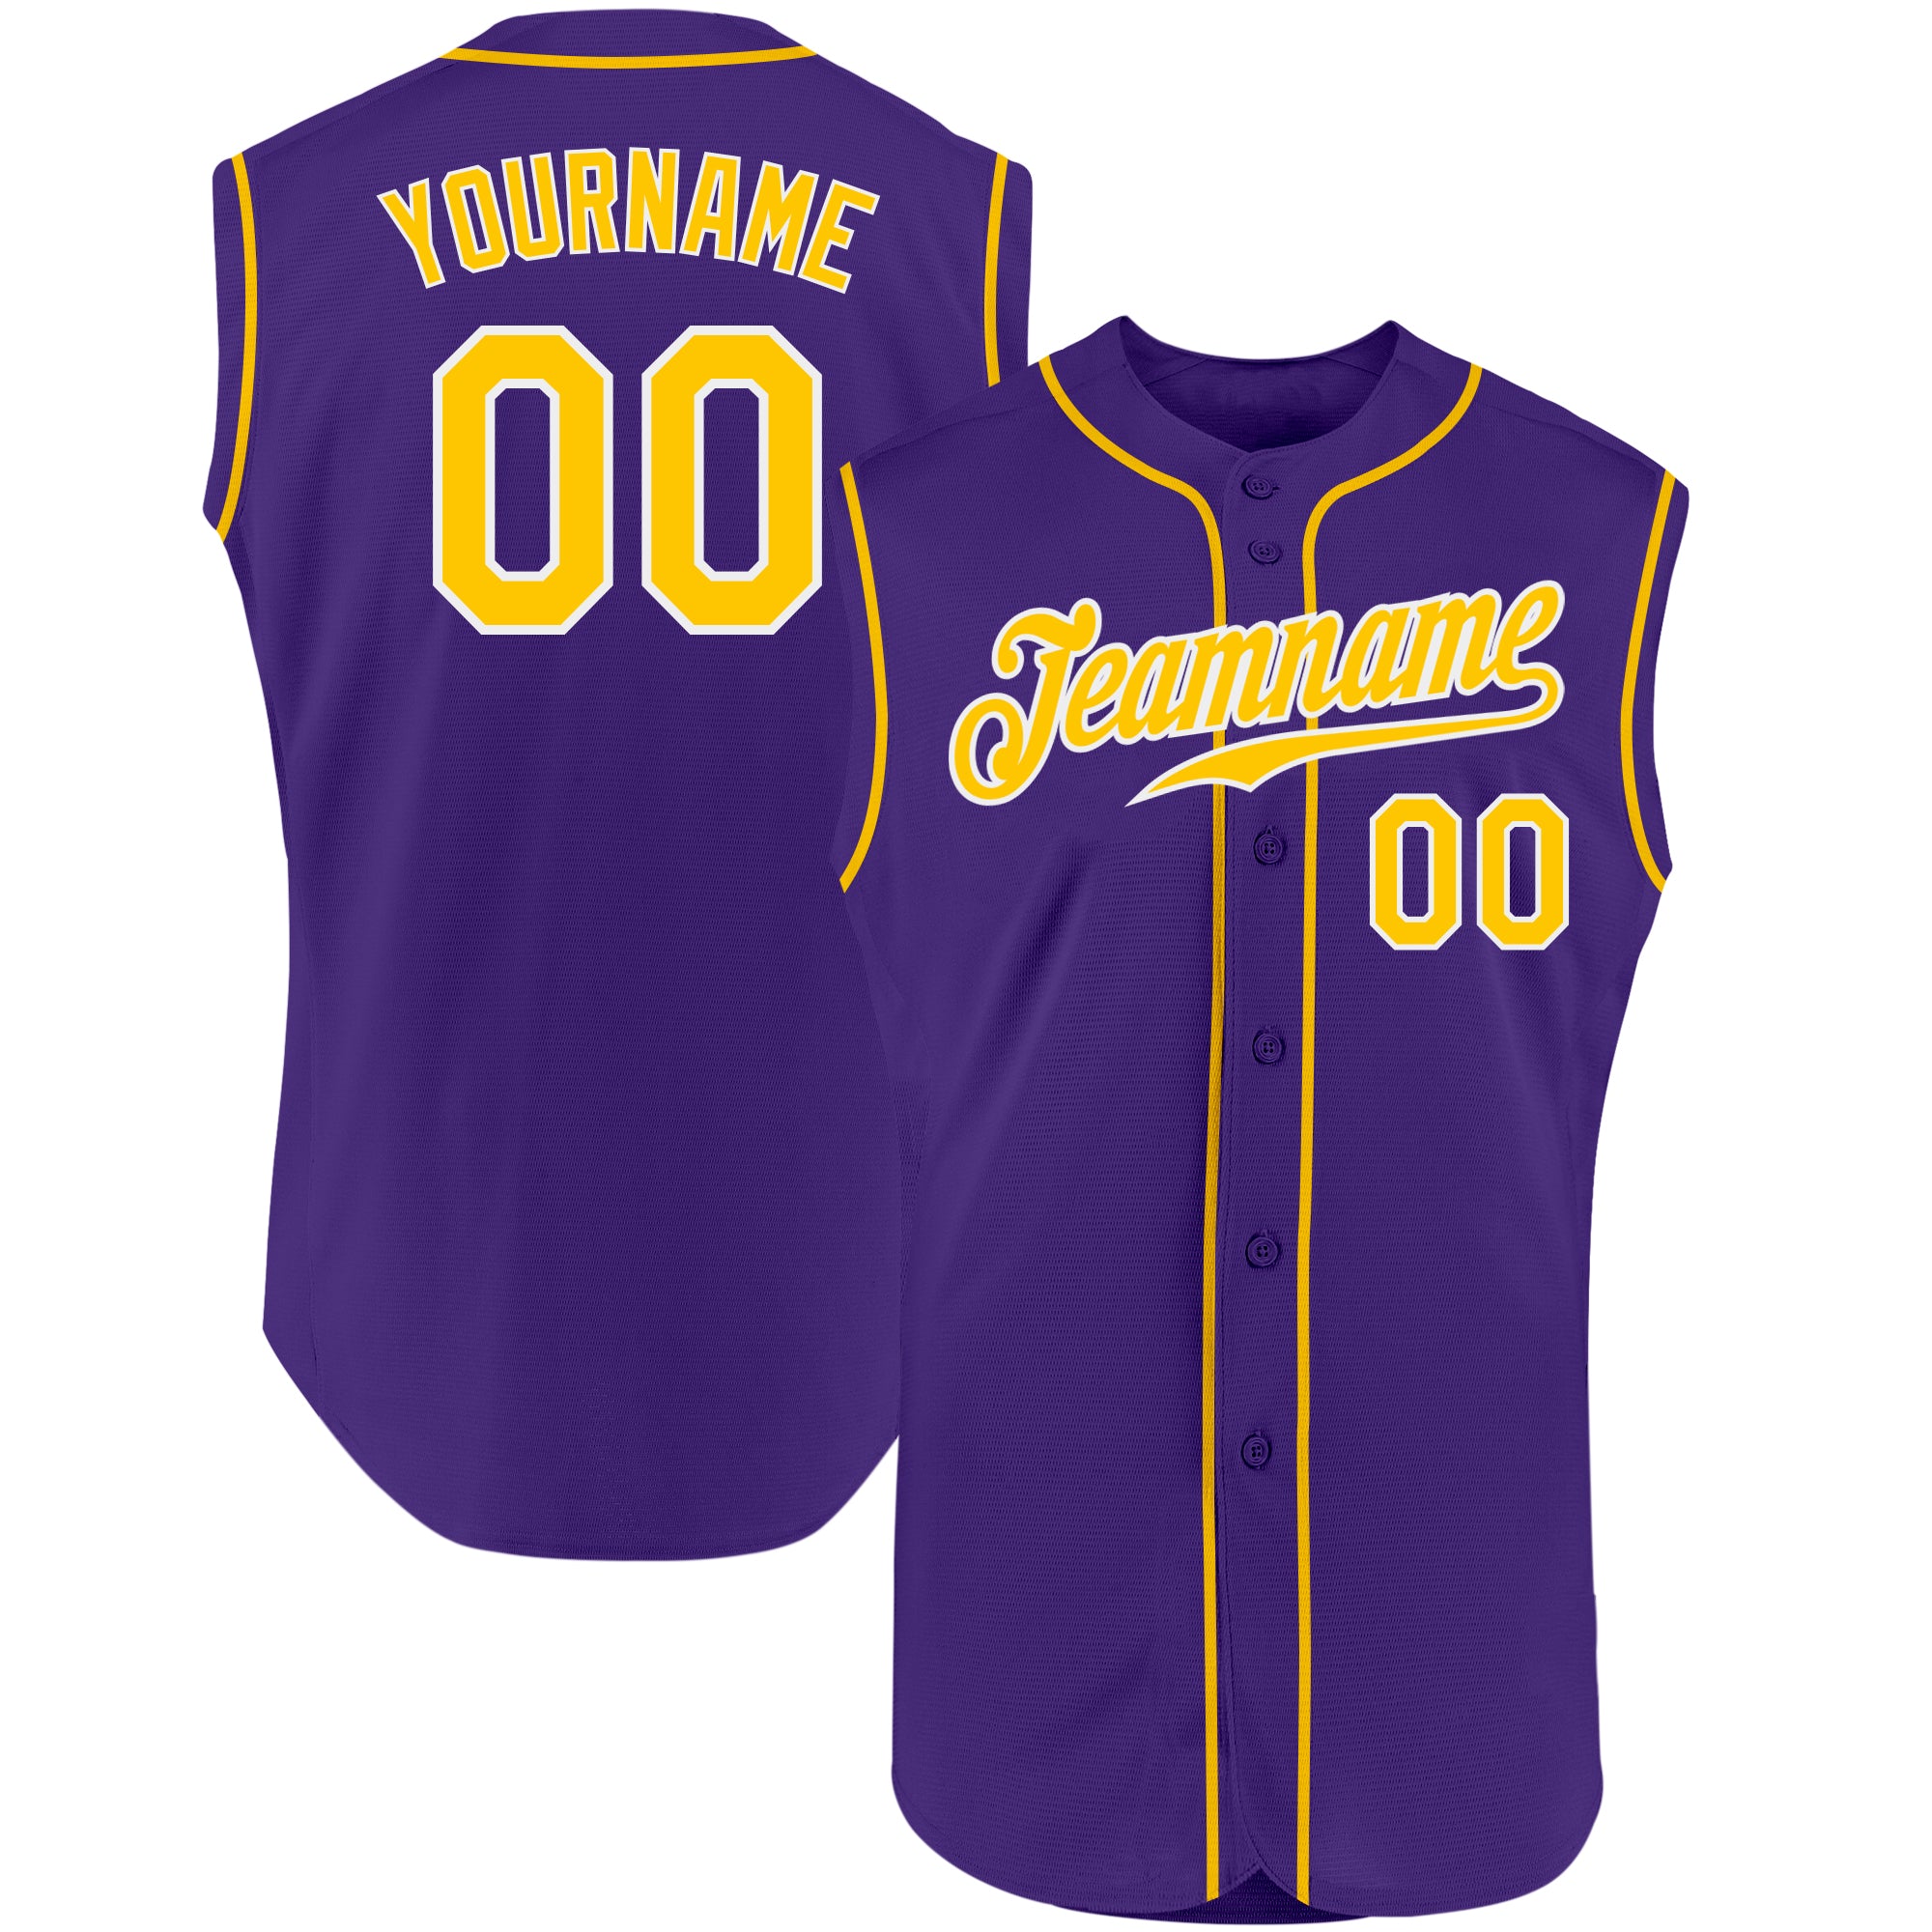 Los Angeles Lakers Baseball Classic Custom Jersey - All Stitched